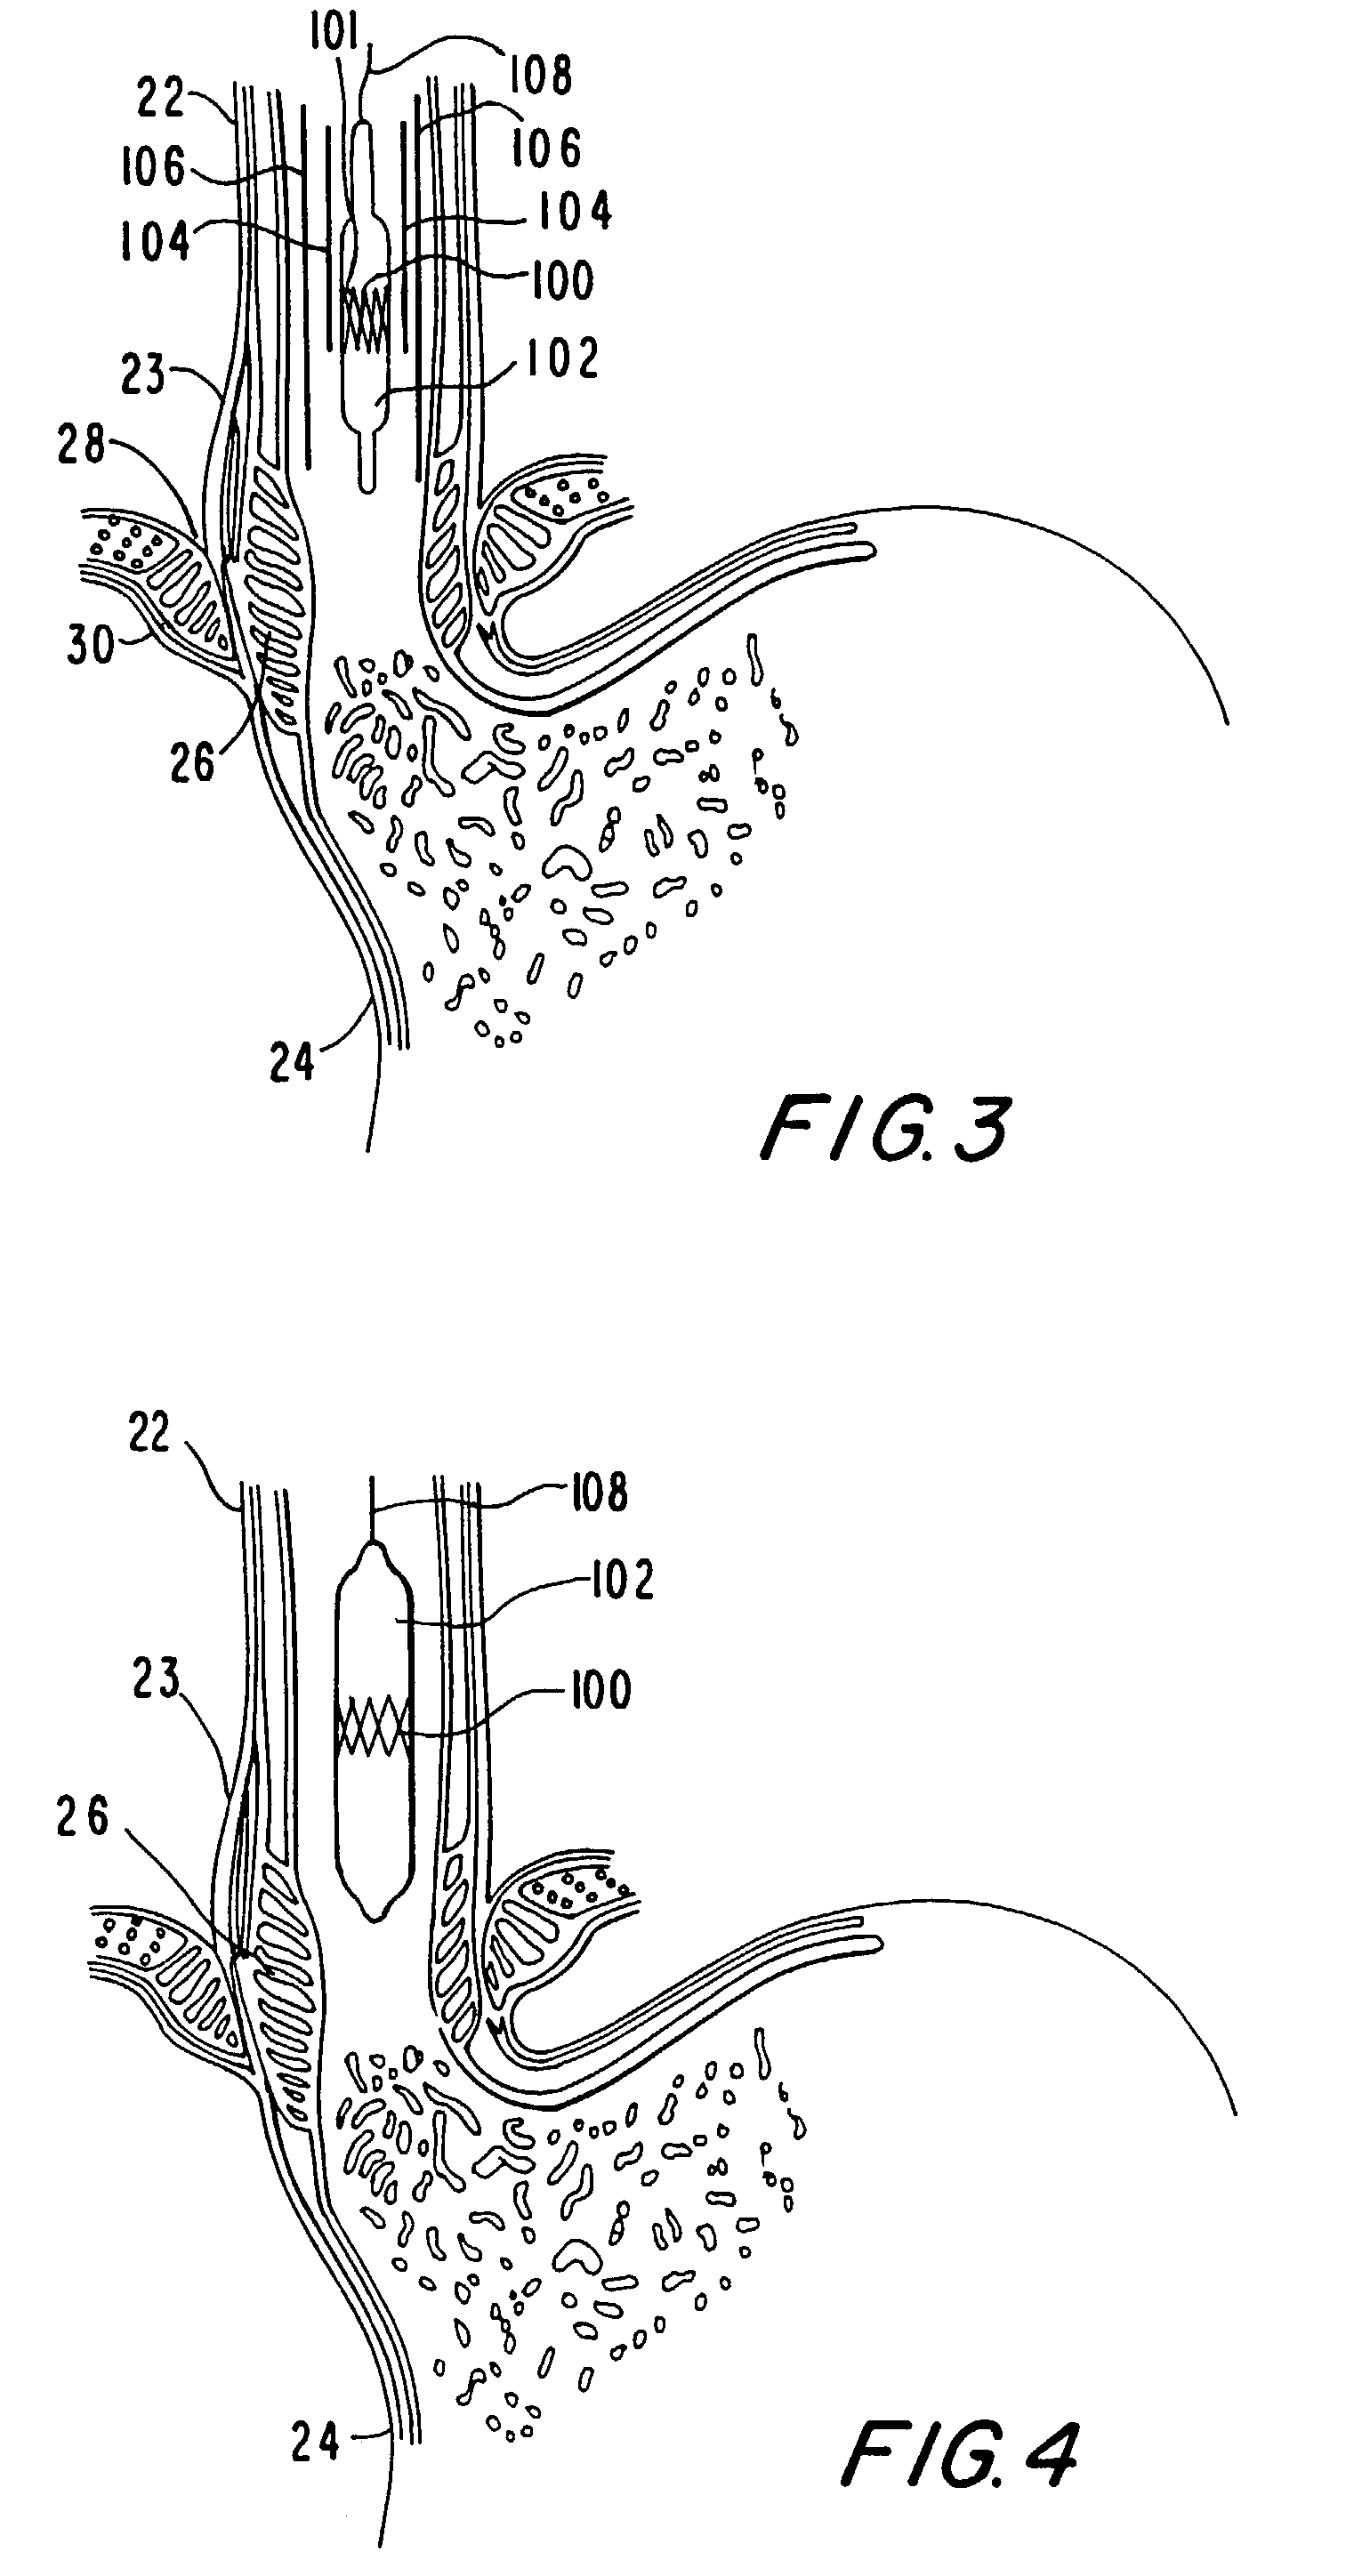 Methods and apparatus for regulating the flow of matter through body tubing